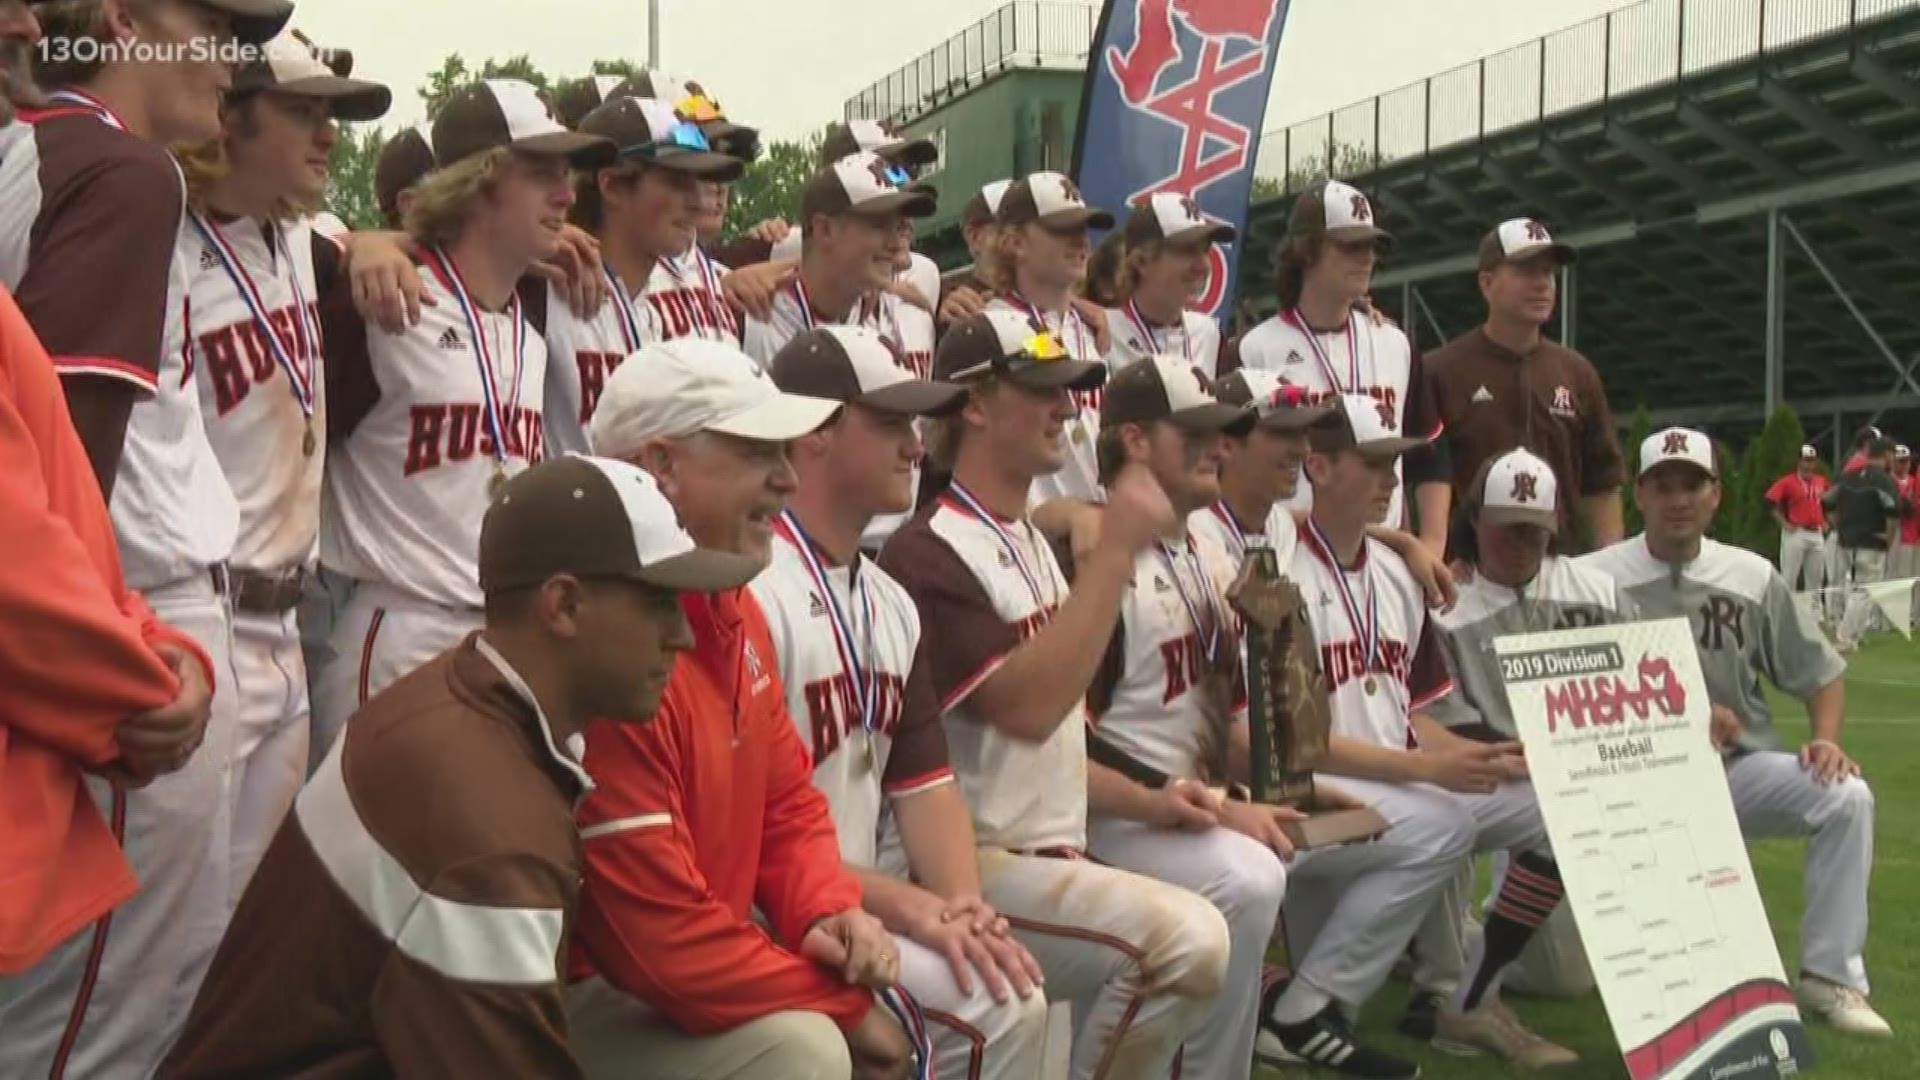 High school baseball: Portage Northern tops Rockford in state finals